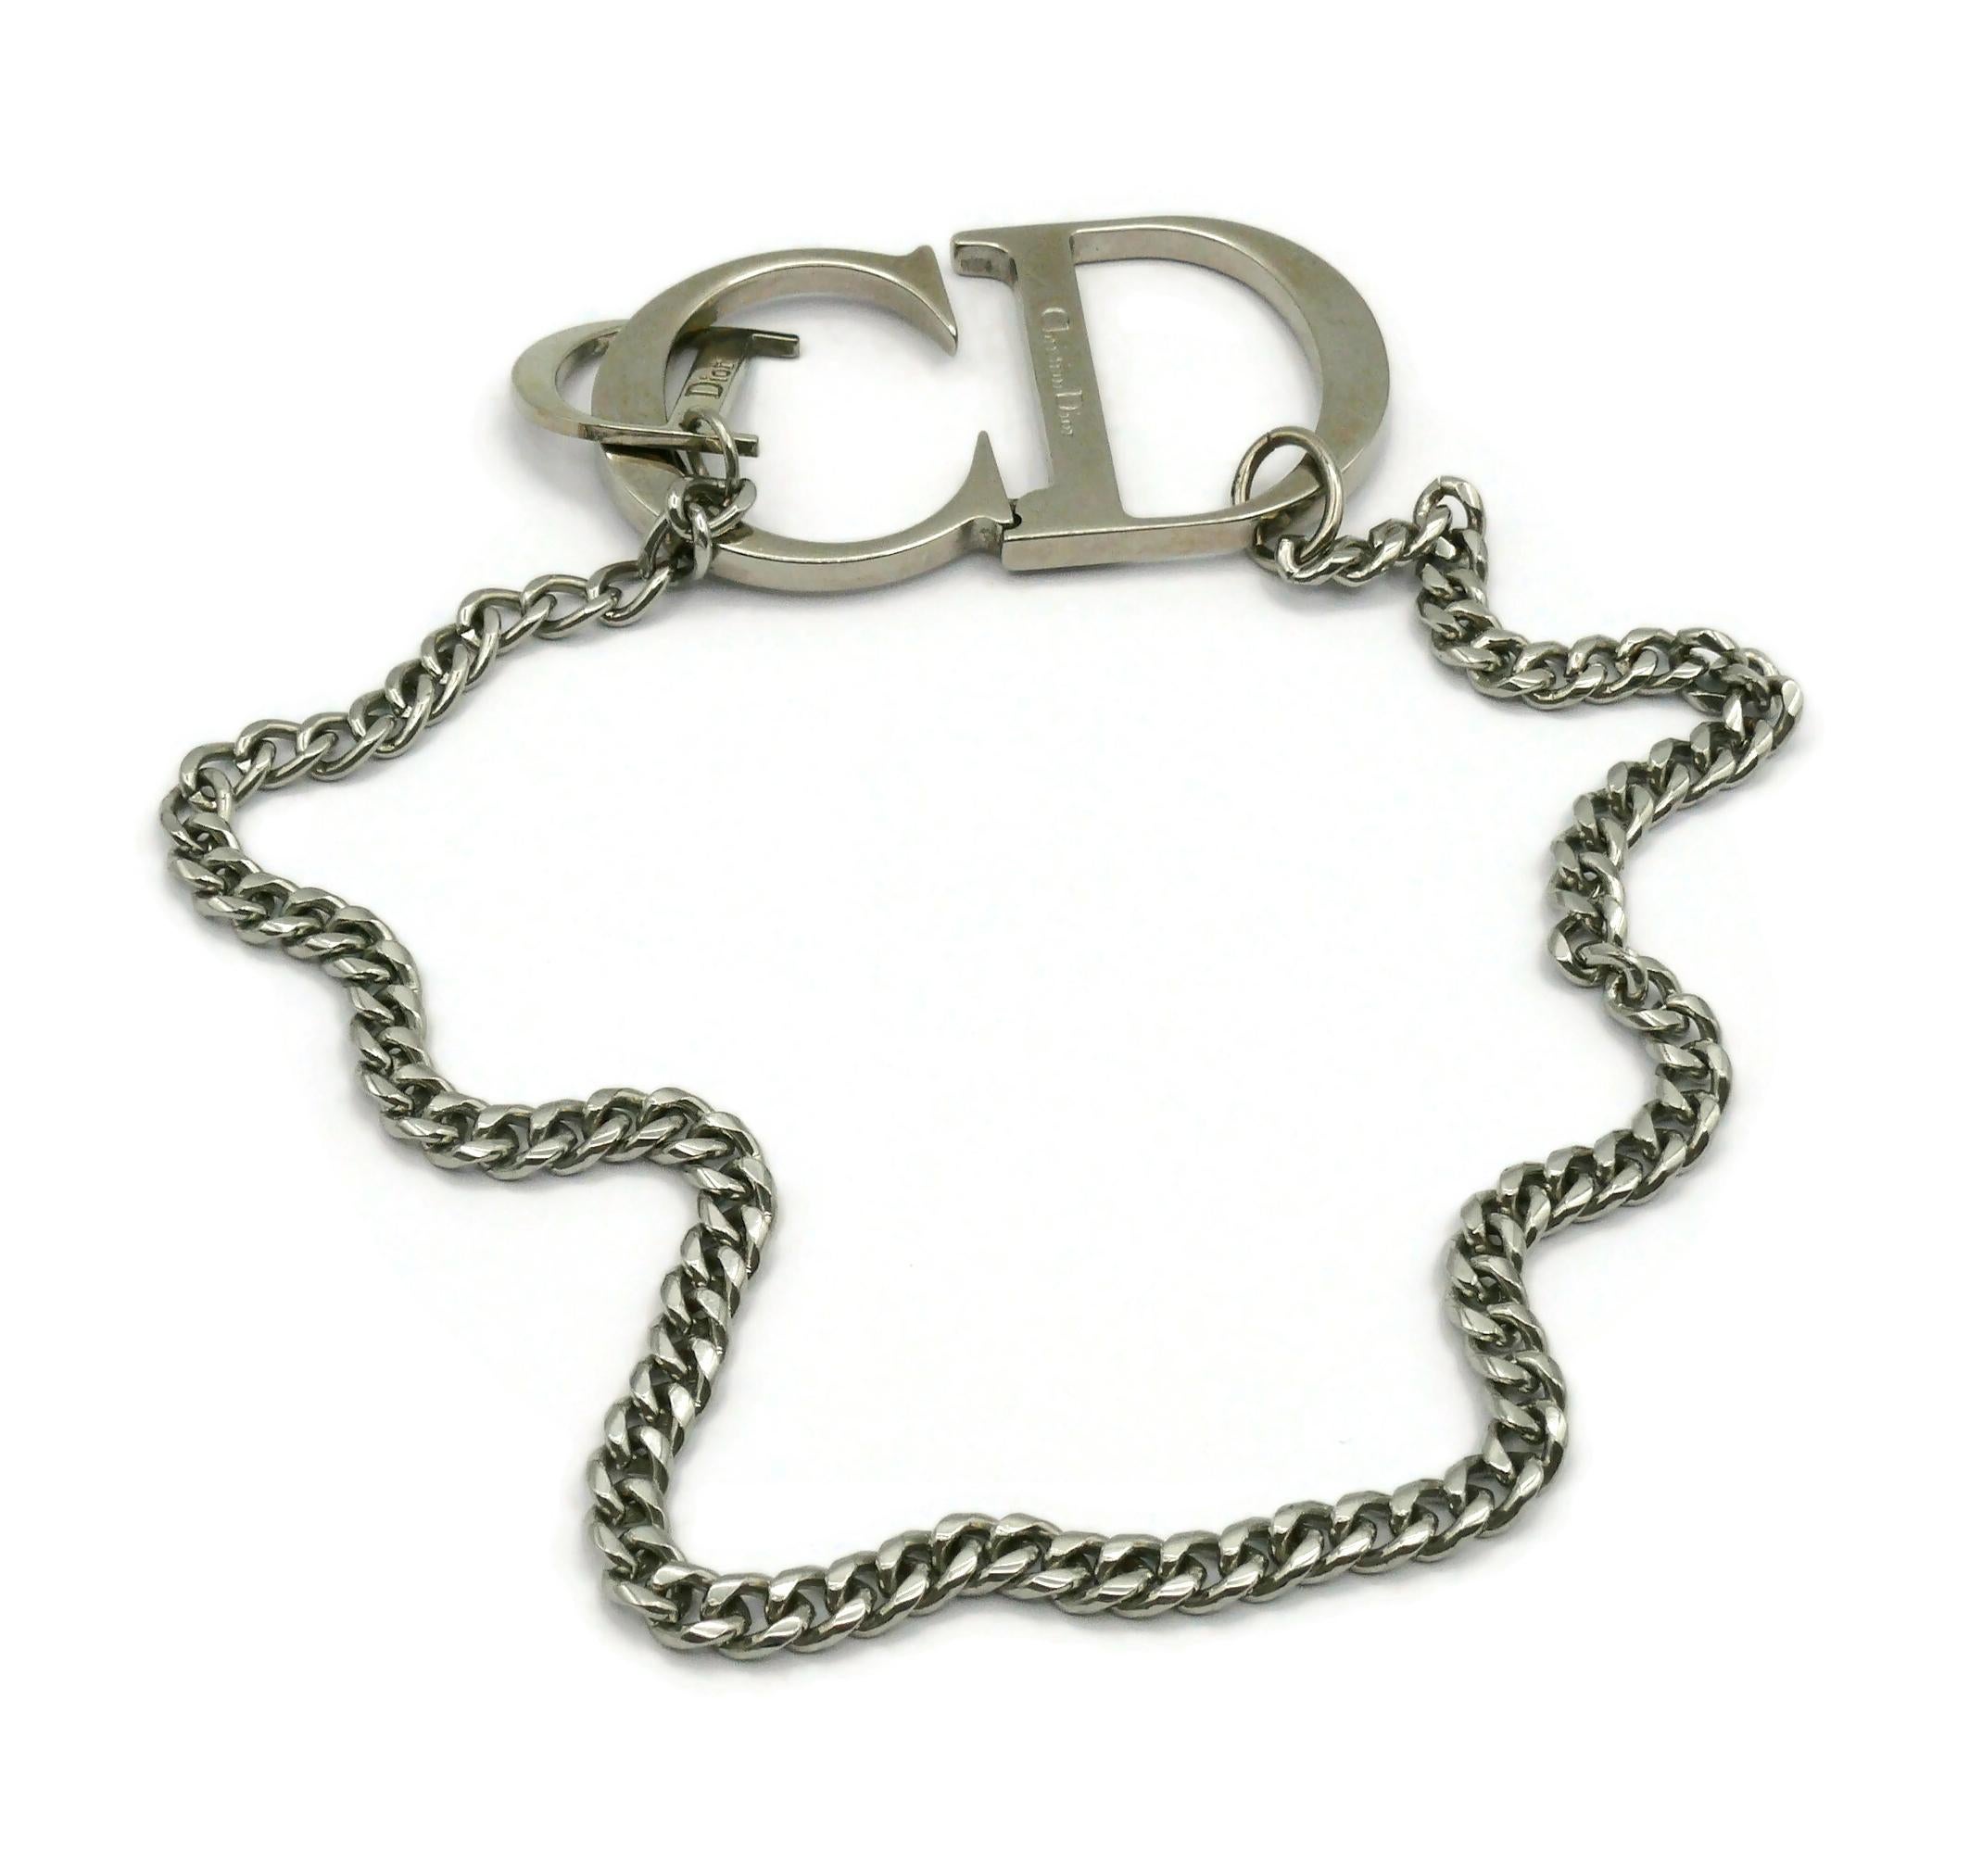 CHRISTIAND DIOR by JOHN GALLIANO Silver Tone CD Chain Necklace For Sale 2